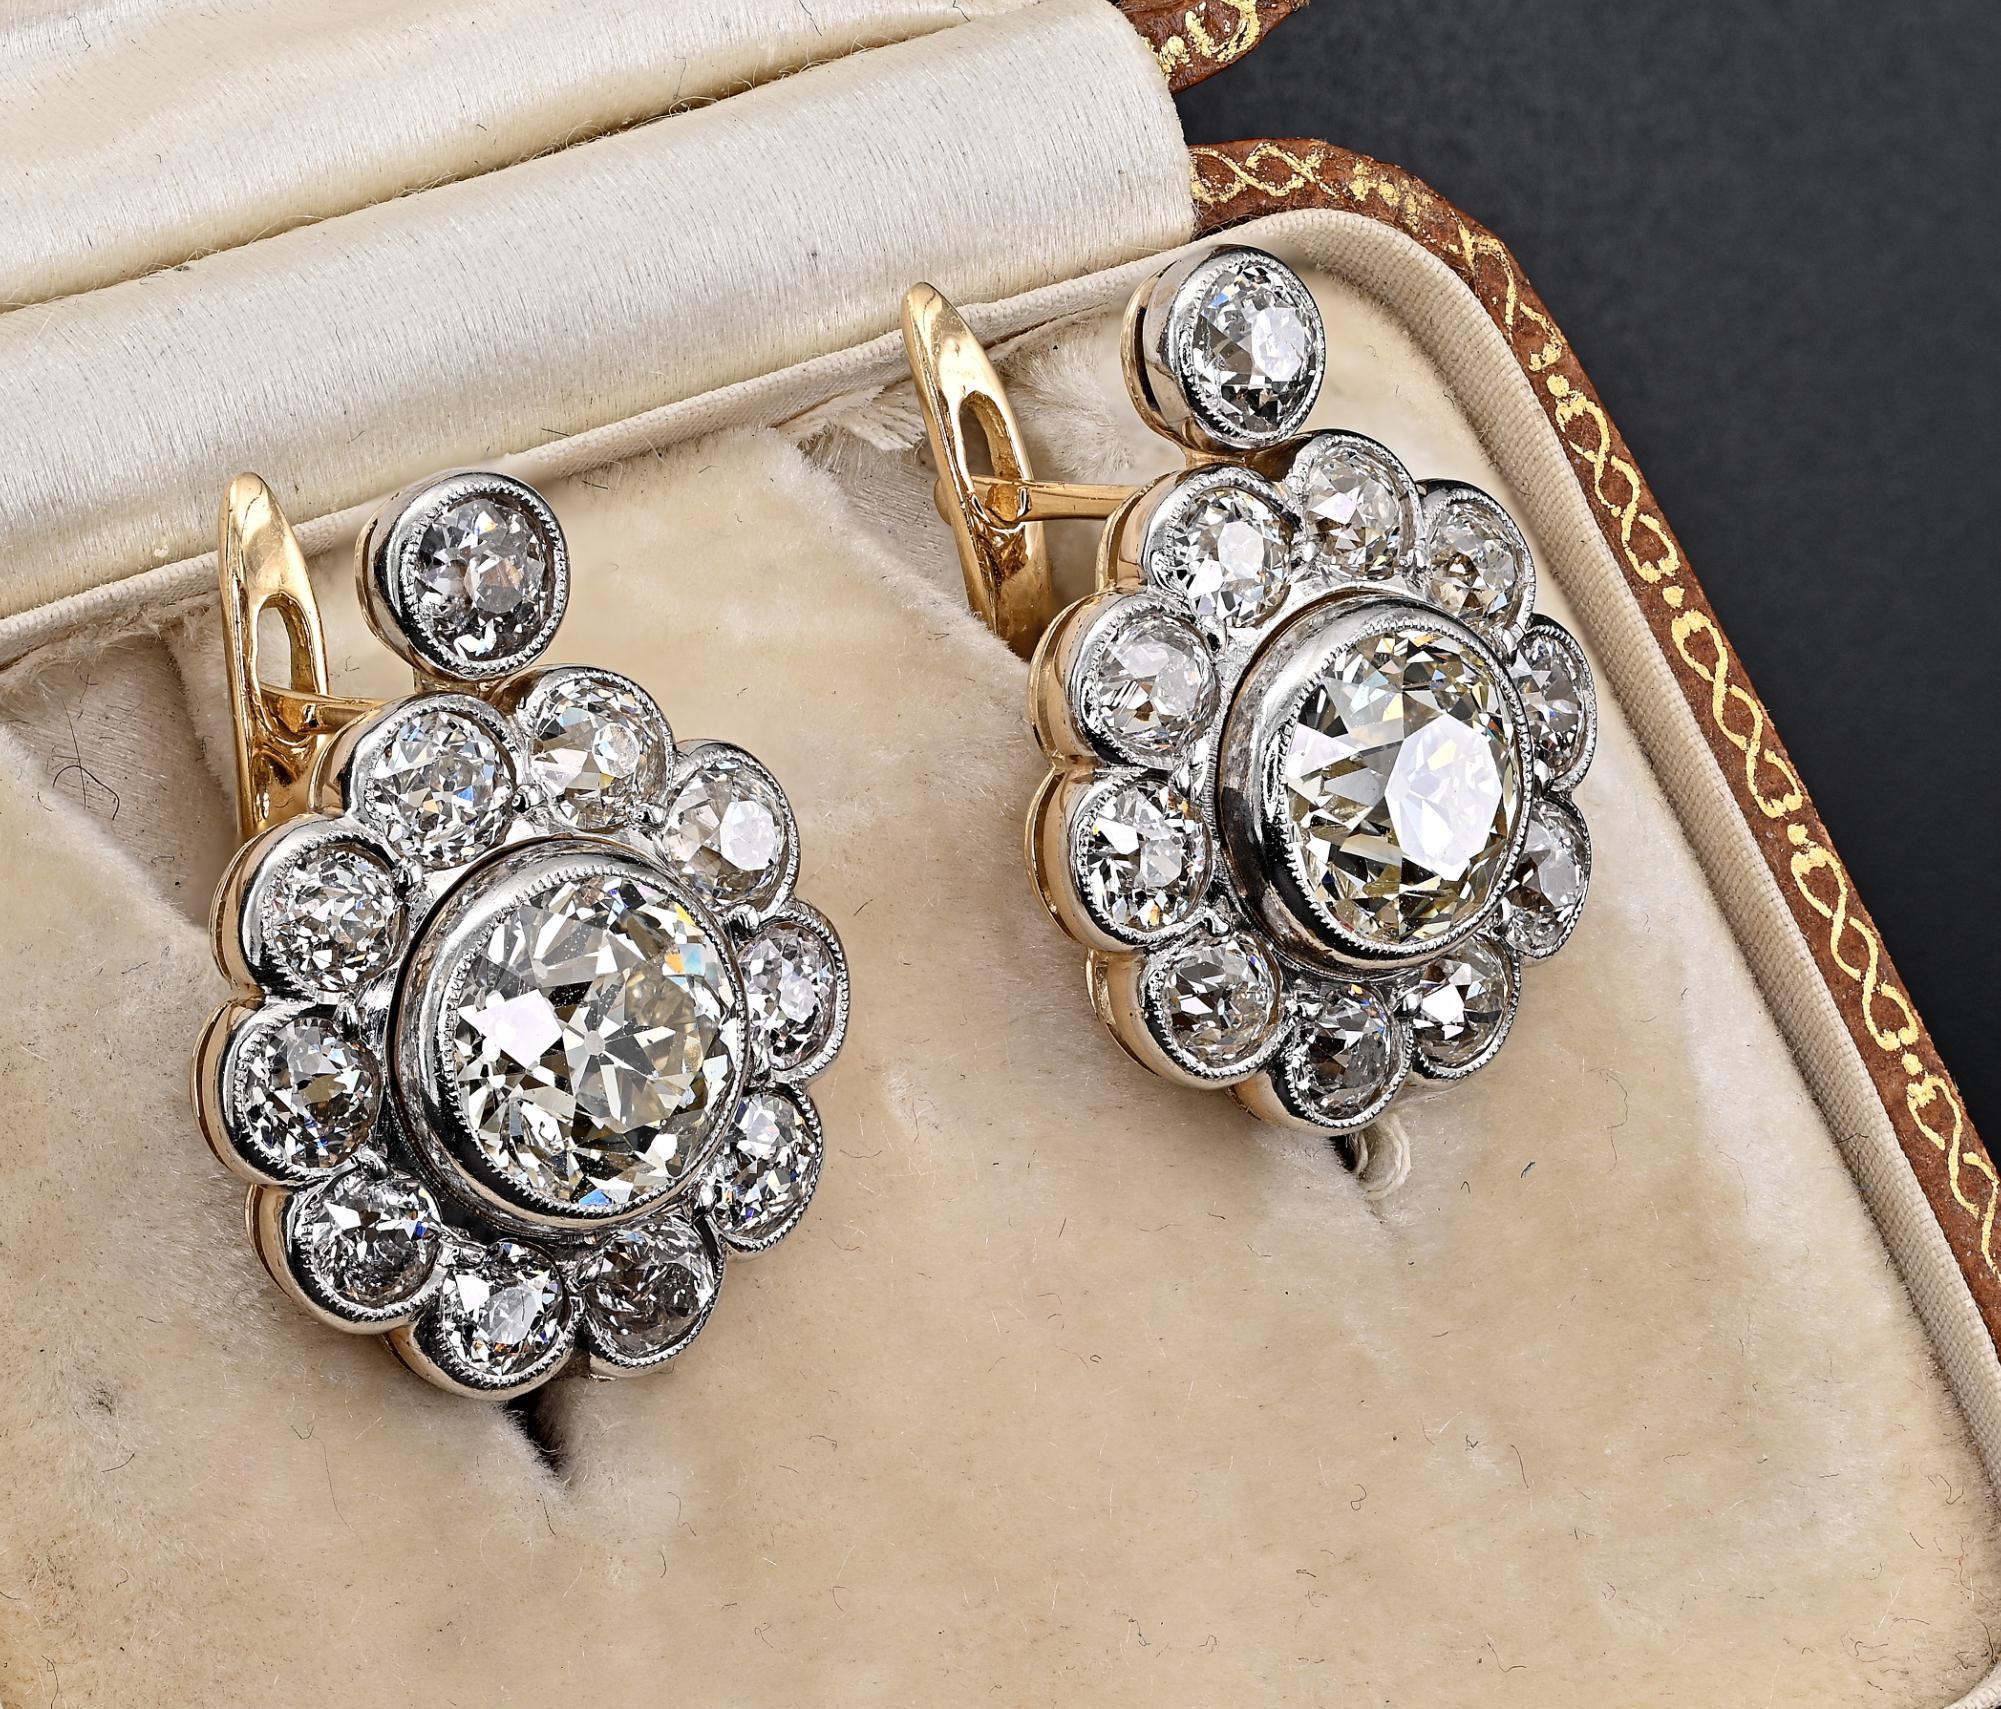 Edwardian 6.40 Ct Diamond 18 KT Daisy Earrings In Good Condition For Sale In Napoli, IT